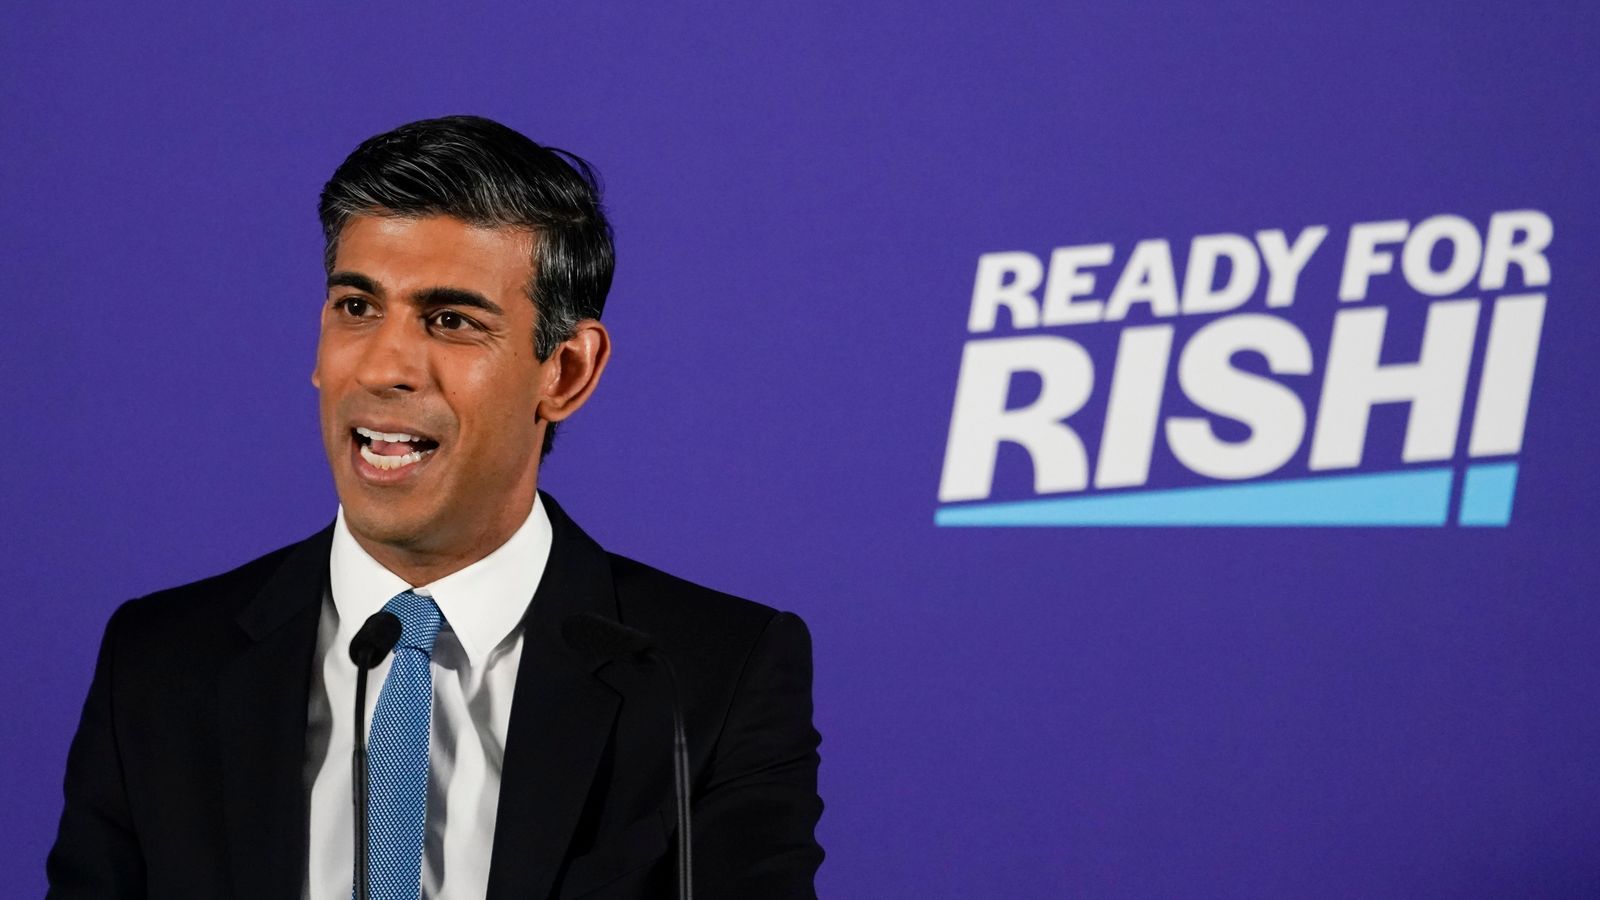 All of Rishi Sunak's campaign pledges from summer leadership race under review